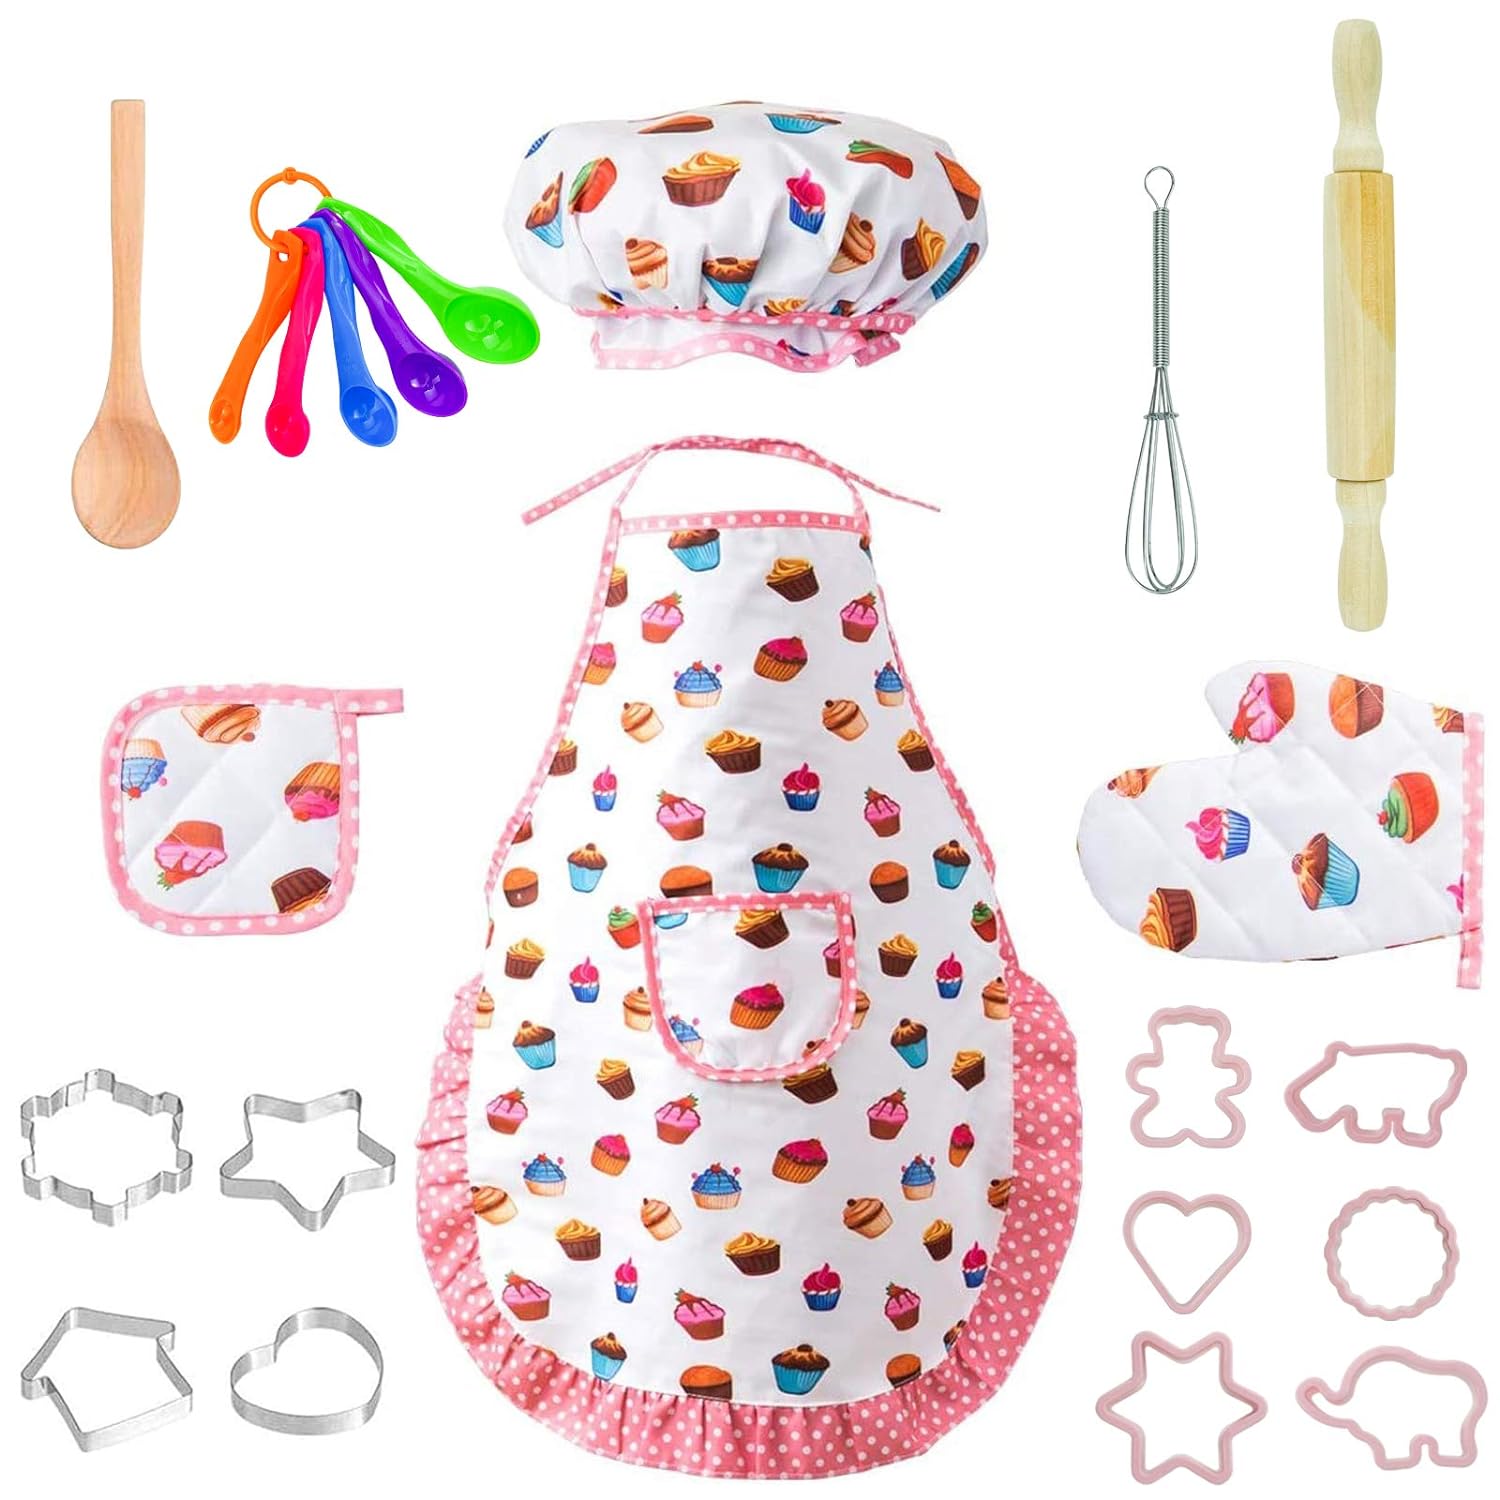 Great Choice Products 22 Pcs Kids Chef Role Play Costume Set, Toddler Cooking Apron Set, Apron And Chef Hat For Dress Up Chef Costume Career Rol